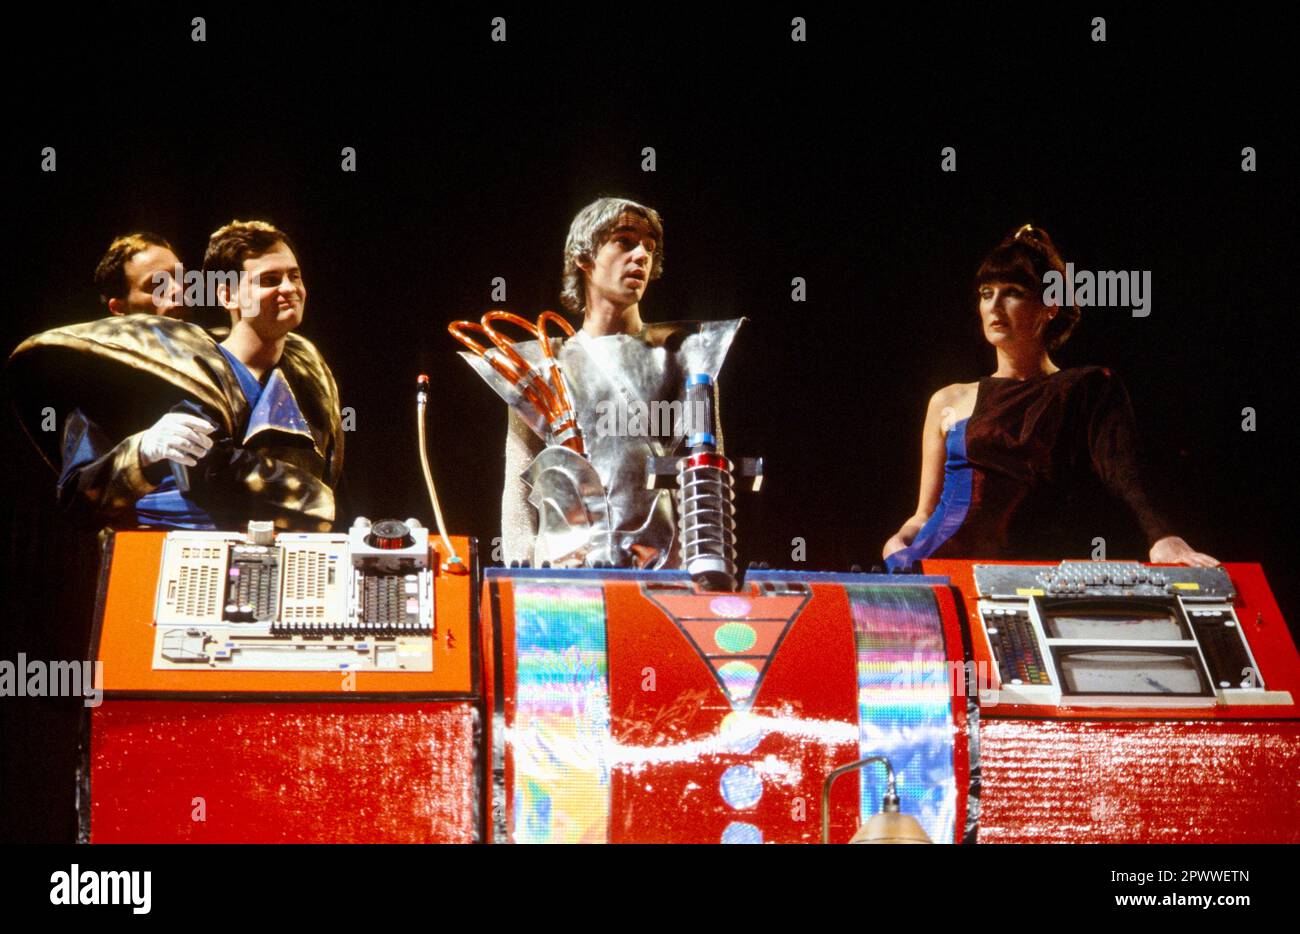 l-r: Nicolas D'Avirro & John Terence (Zaphod Beeblebrox), David Learner (Marvin), Jude Alderson (Trillian) in THE HITCHHIKER'S GUIDE TO THE GALAXY by Douglas Adams at the Rainbow Theatre, Finsbury Park, London  15/07/1980  set design: Richard Dunkley  scenic design: Mitch Davies  costumes: Barbara Tyrell  lighting: Martin Richman  director: Ken Campbell Stock Photo